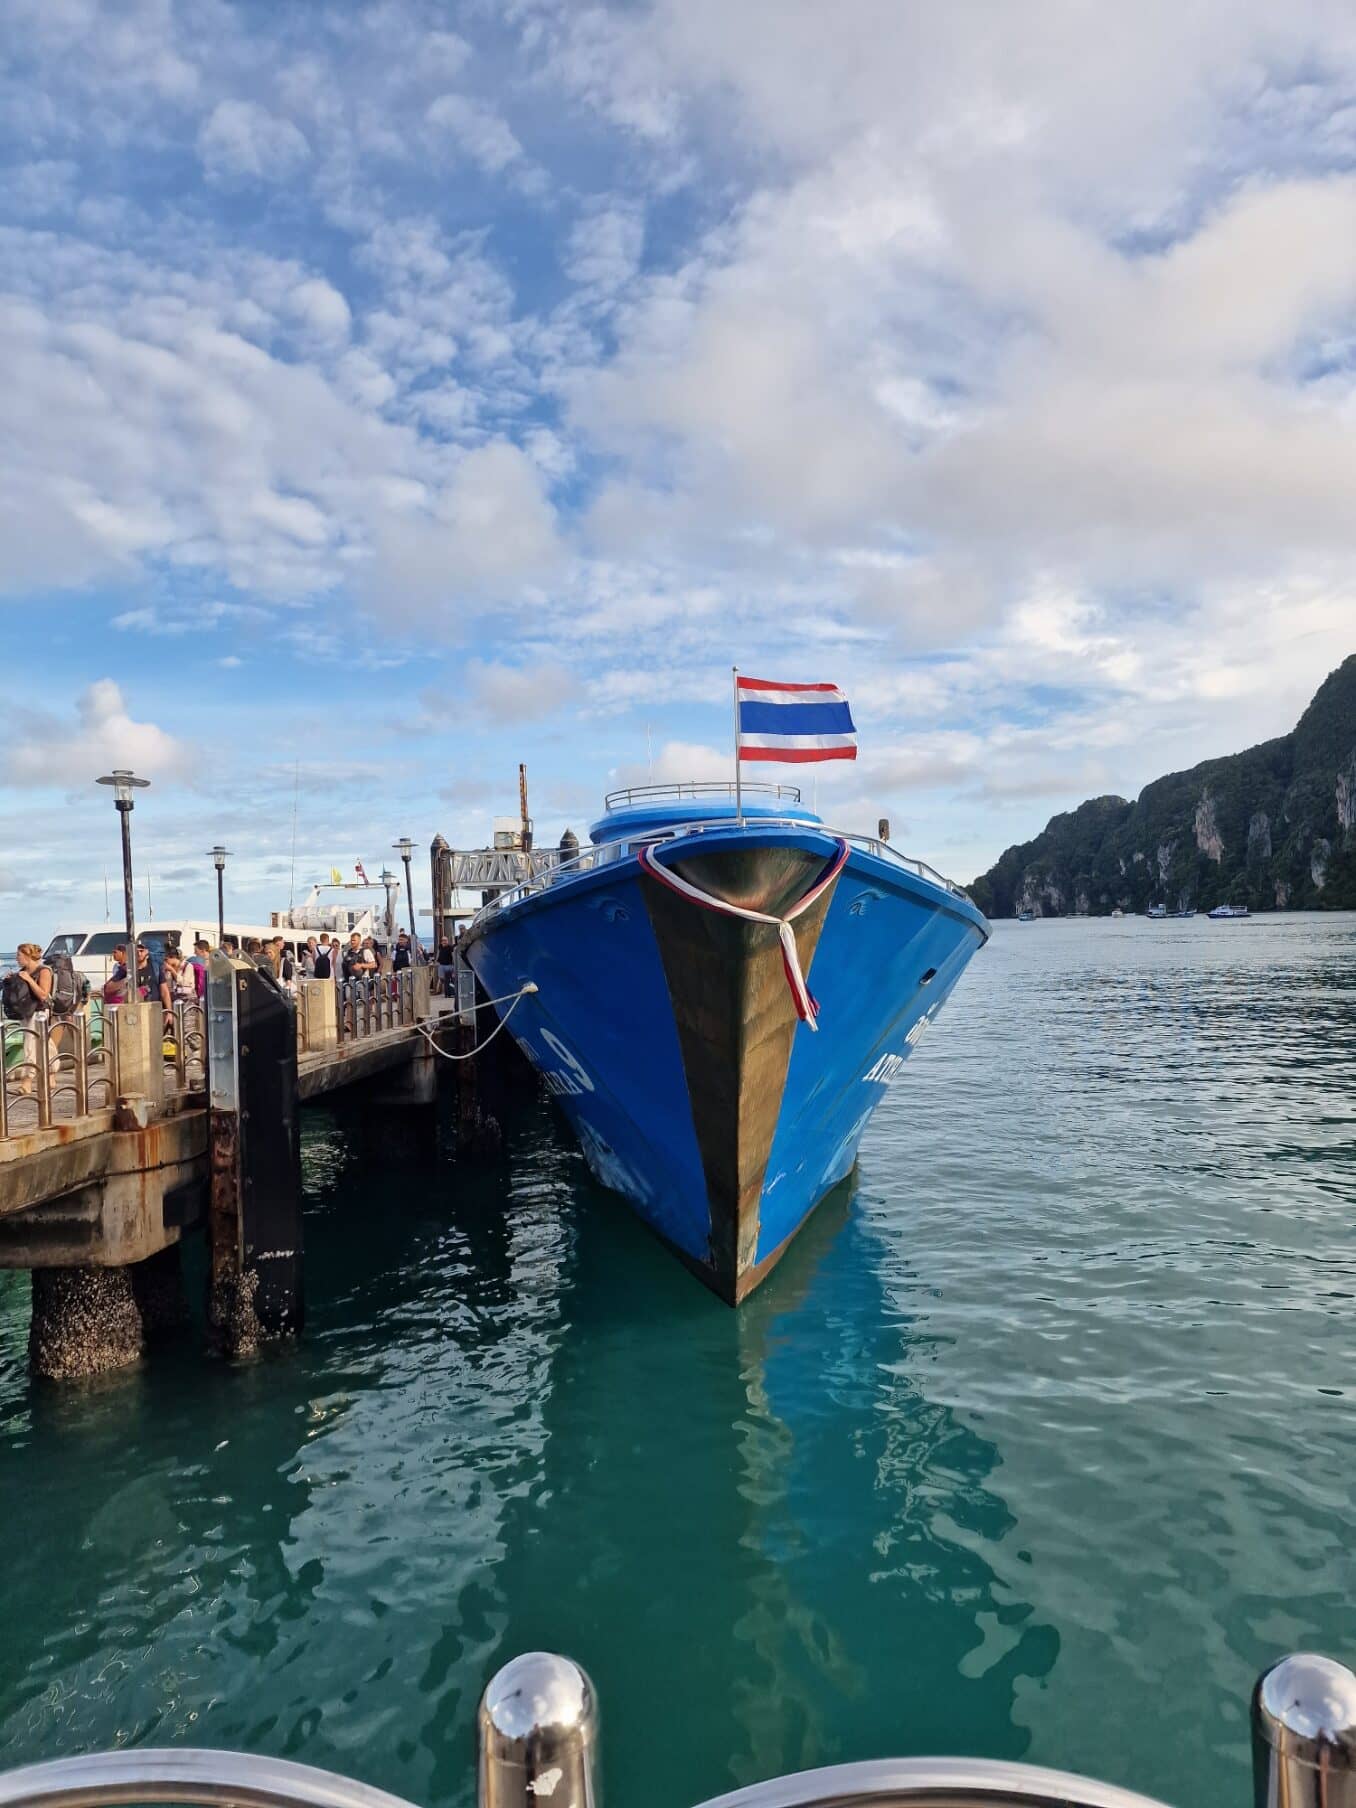 How to get to Phi Phi Islands in 2023 – The ultimate guide